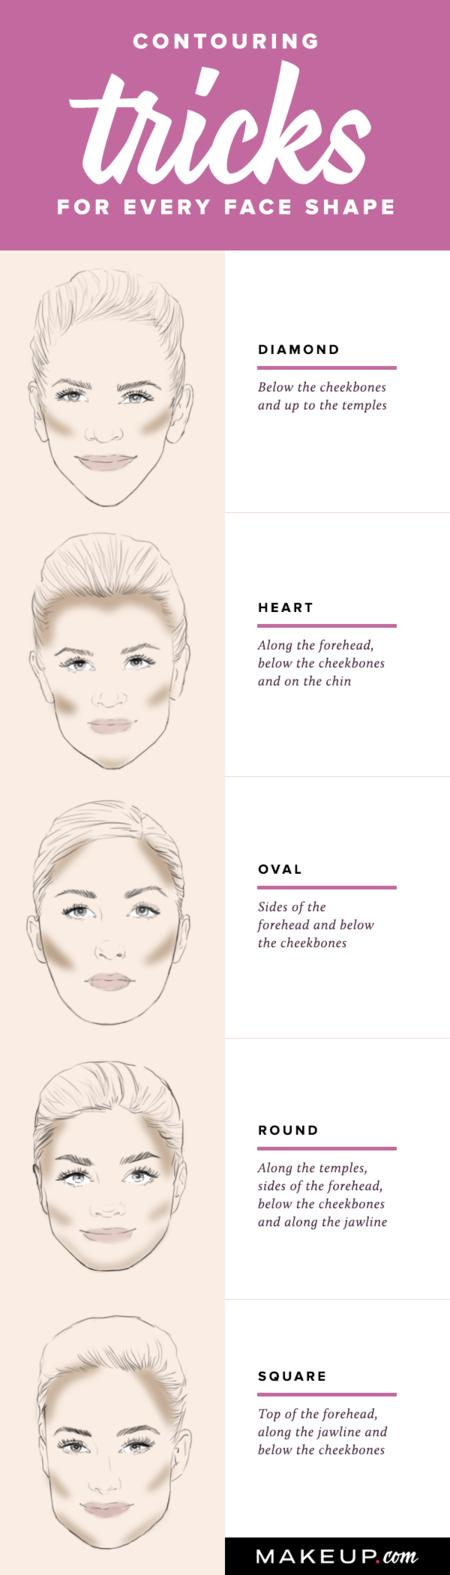 Beauty Tips for Every Face Shape 